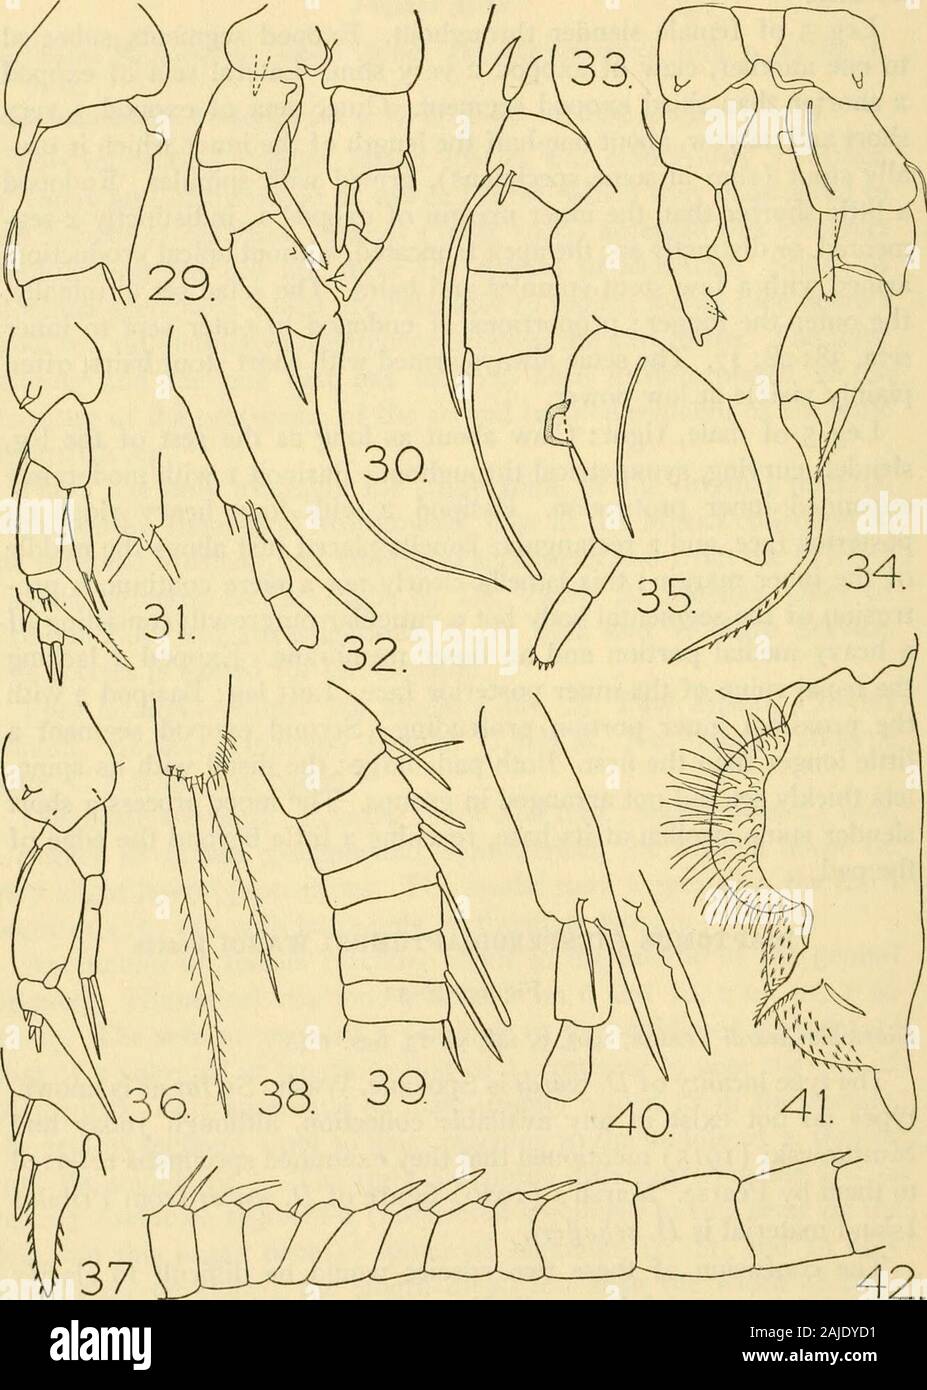 Smithsonian miscellaneous collections . ts thickly set and not arranged in groups. The inner process a shortslender spine swollen at its base, reaching a little beyond the edge ofthe pad. DIAPTOMUS (HESPERODIAPTOMUS) WARDI Pearse Figures 29-32Diaptomus zvardi Pearse, 1905, p. 148, pi. 13, figs. 1-4. The type locality of D. wardi is Spokane, Wash. So far as is known,types do not exist in any available collection, although Juday andMuttkowski (1915) mentioned that they examined specimens referredto them by Pearse. Marshs (1920) figure of D. wardi from PribilofIsland material is D. schefferi. The Stock Photo